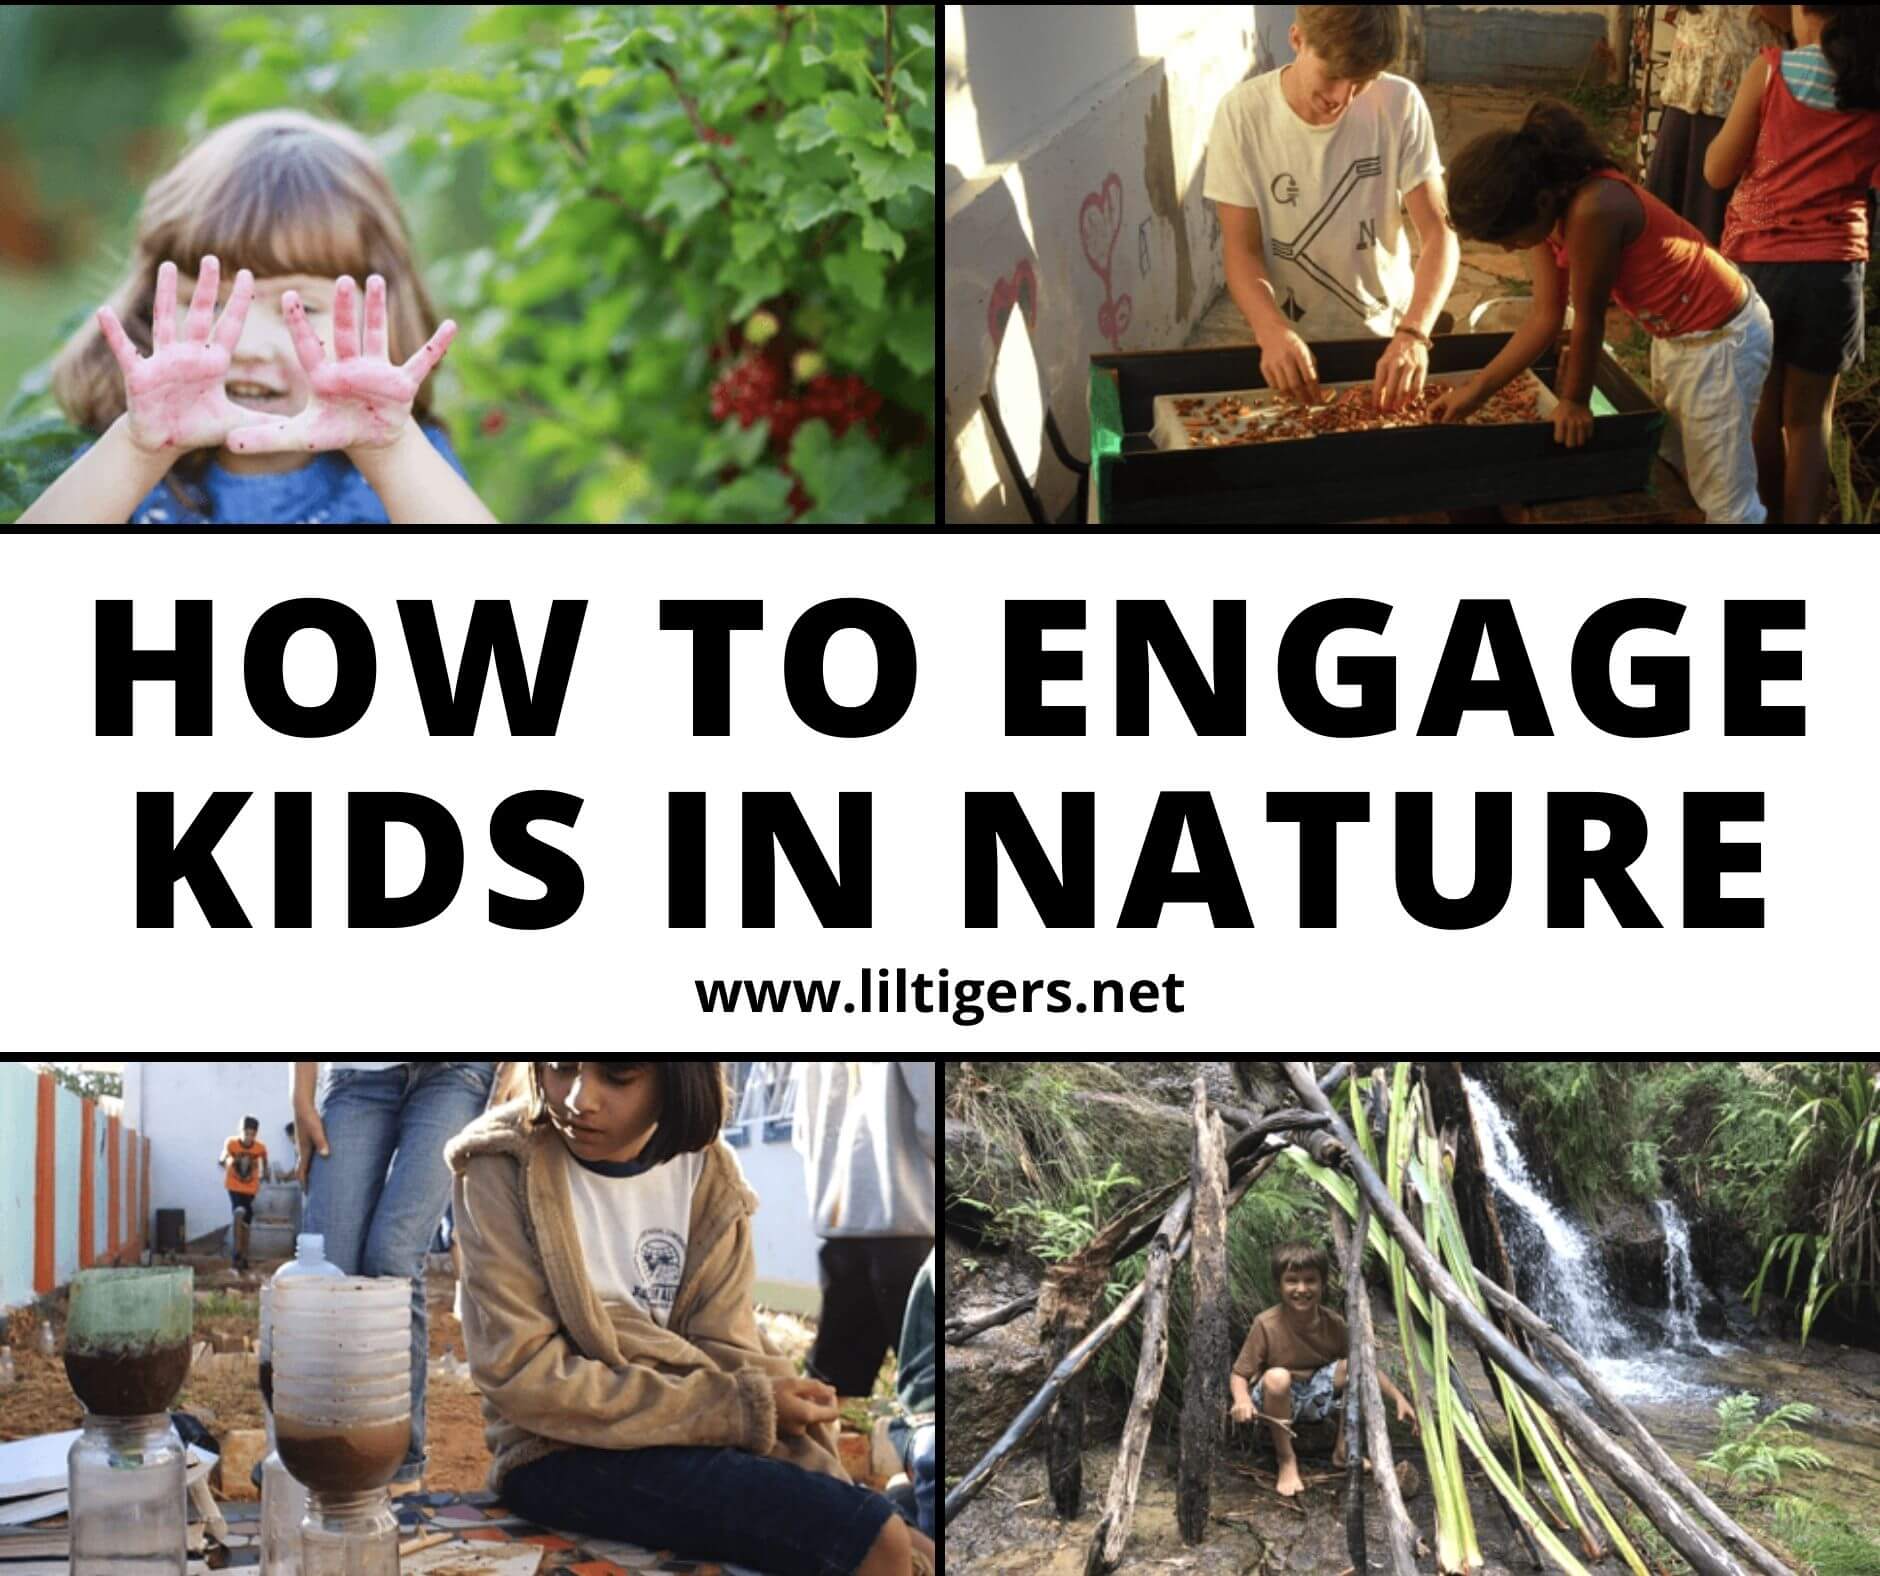 HOW TO ENGAGE KIDS IN NATURE